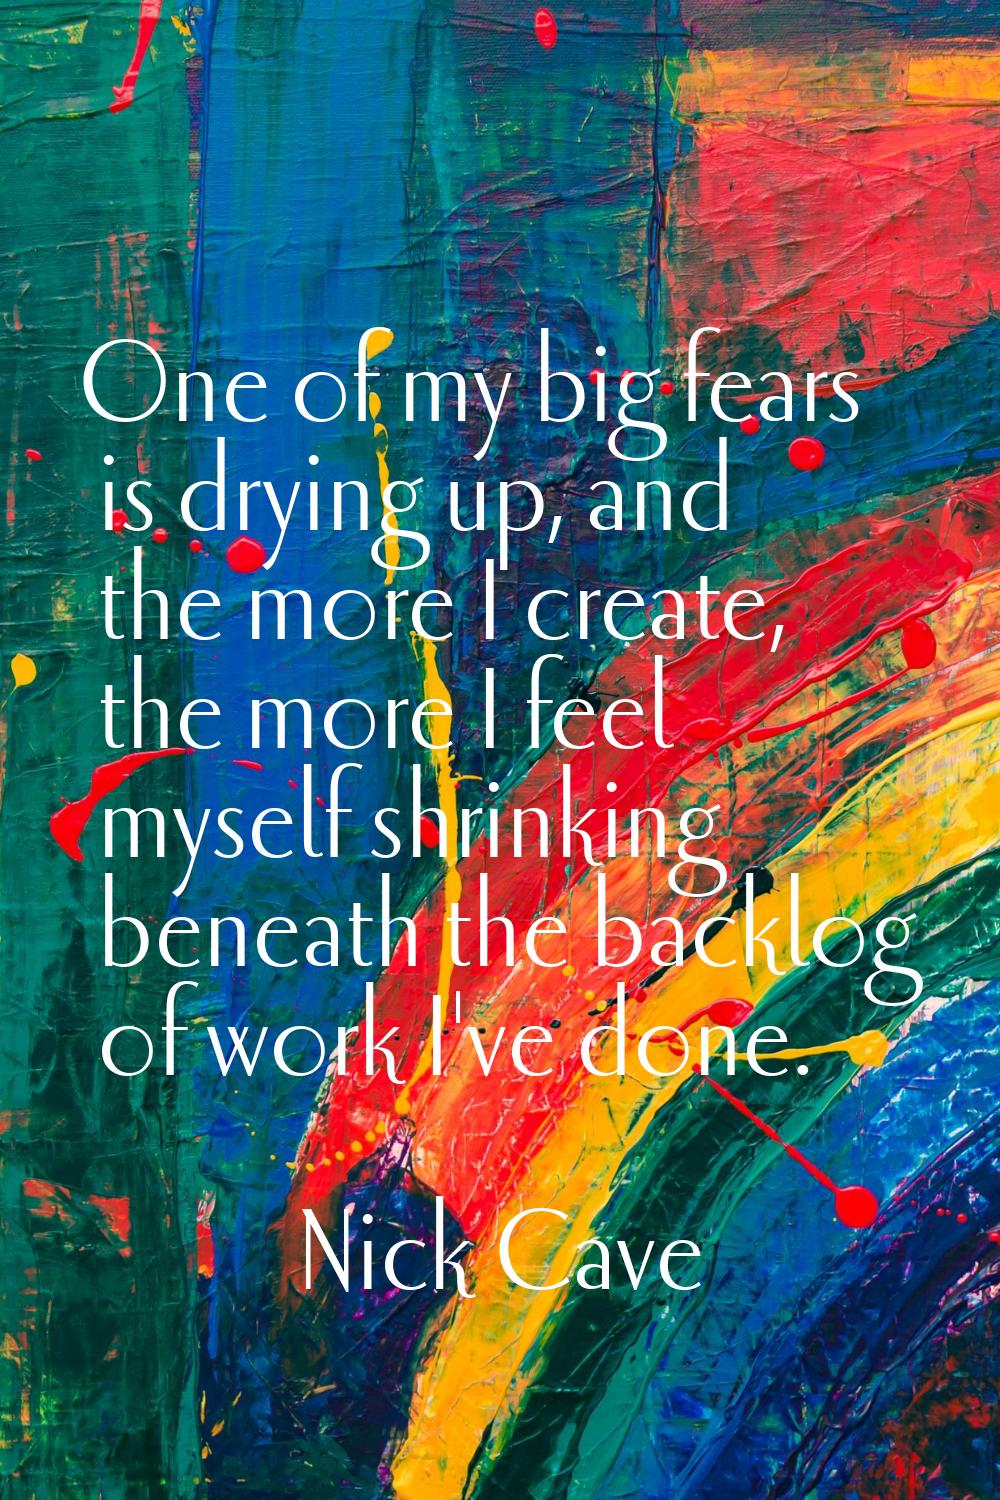 One of my big fears is drying up, and the more I create, the more I feel myself shrinking beneath t